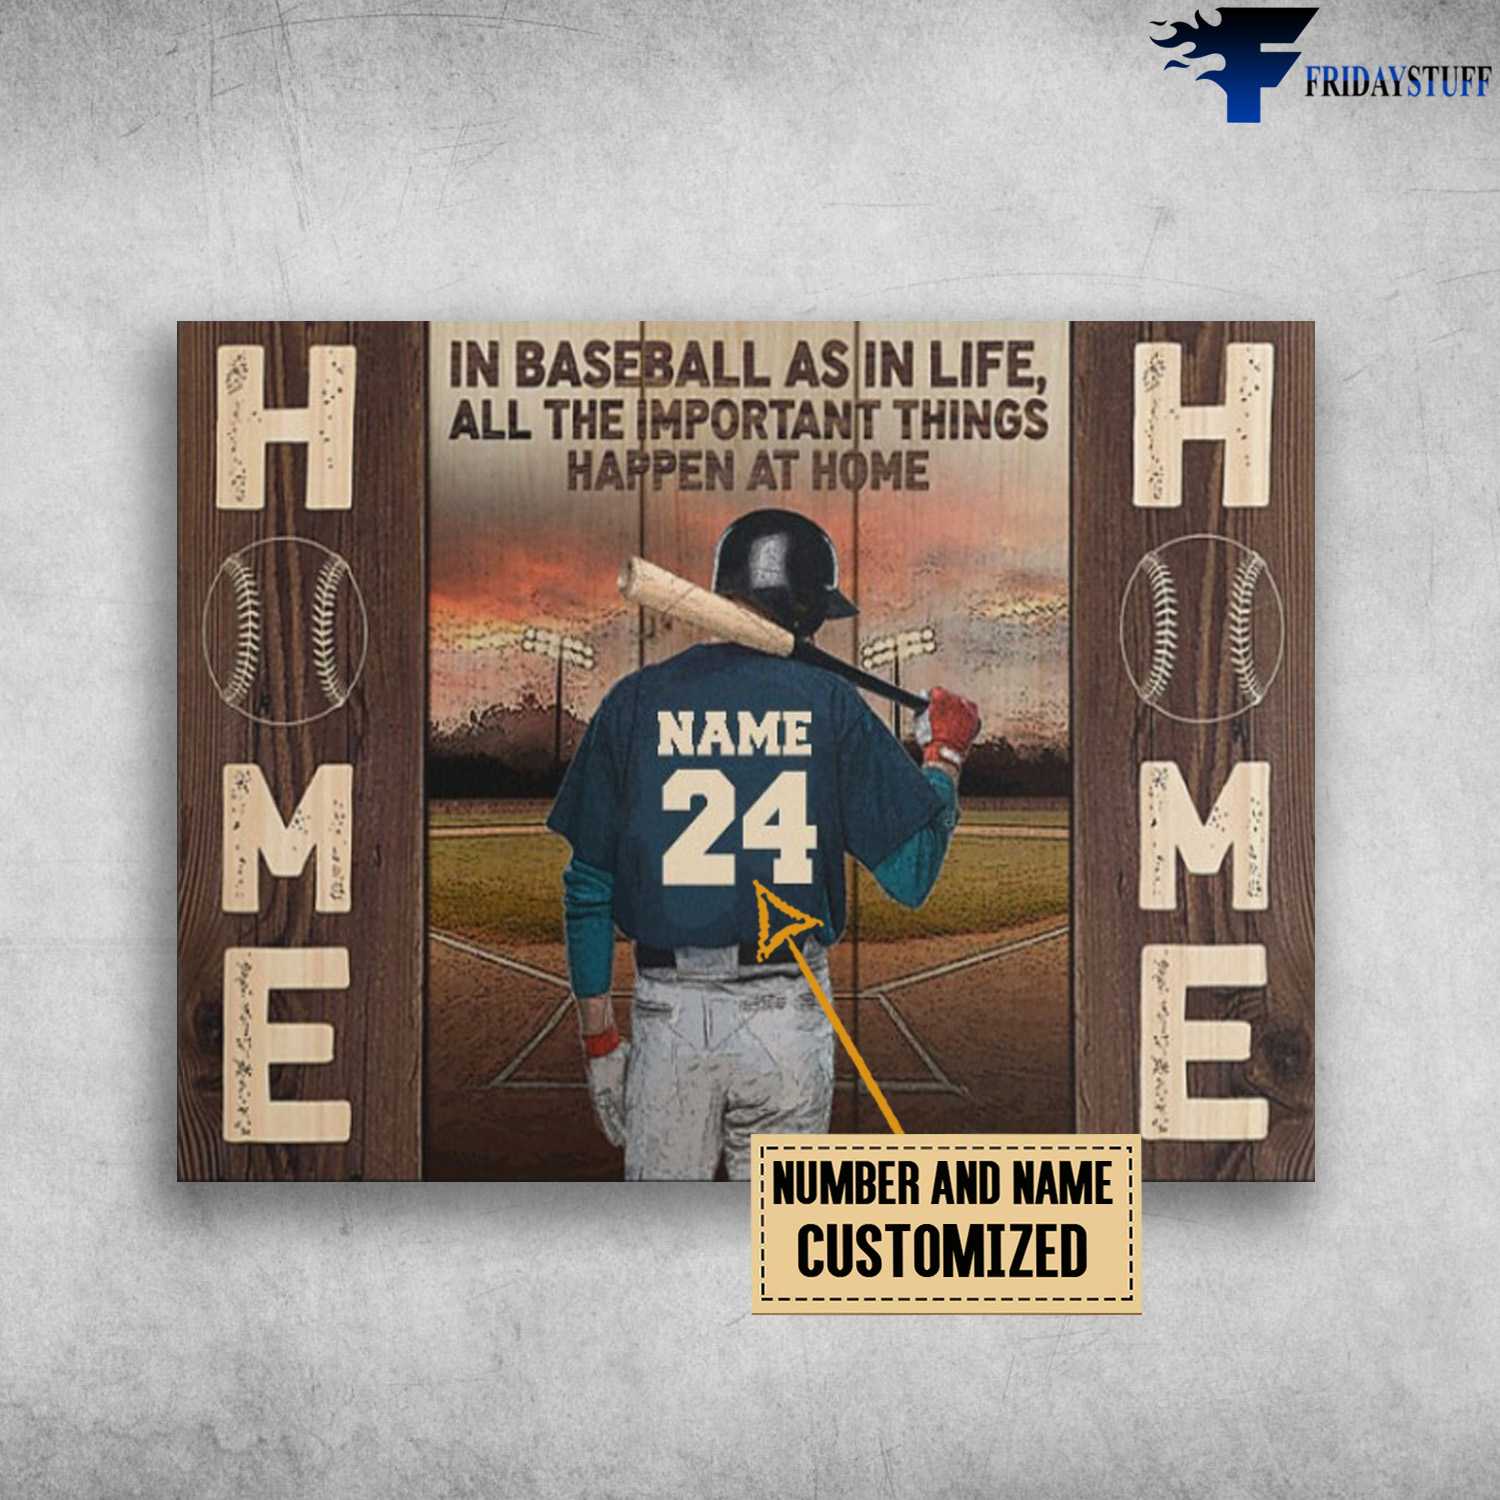 Baseball Player, Baseball Poster, In Baseball, As In Life, All The Important Things, Happen At Home